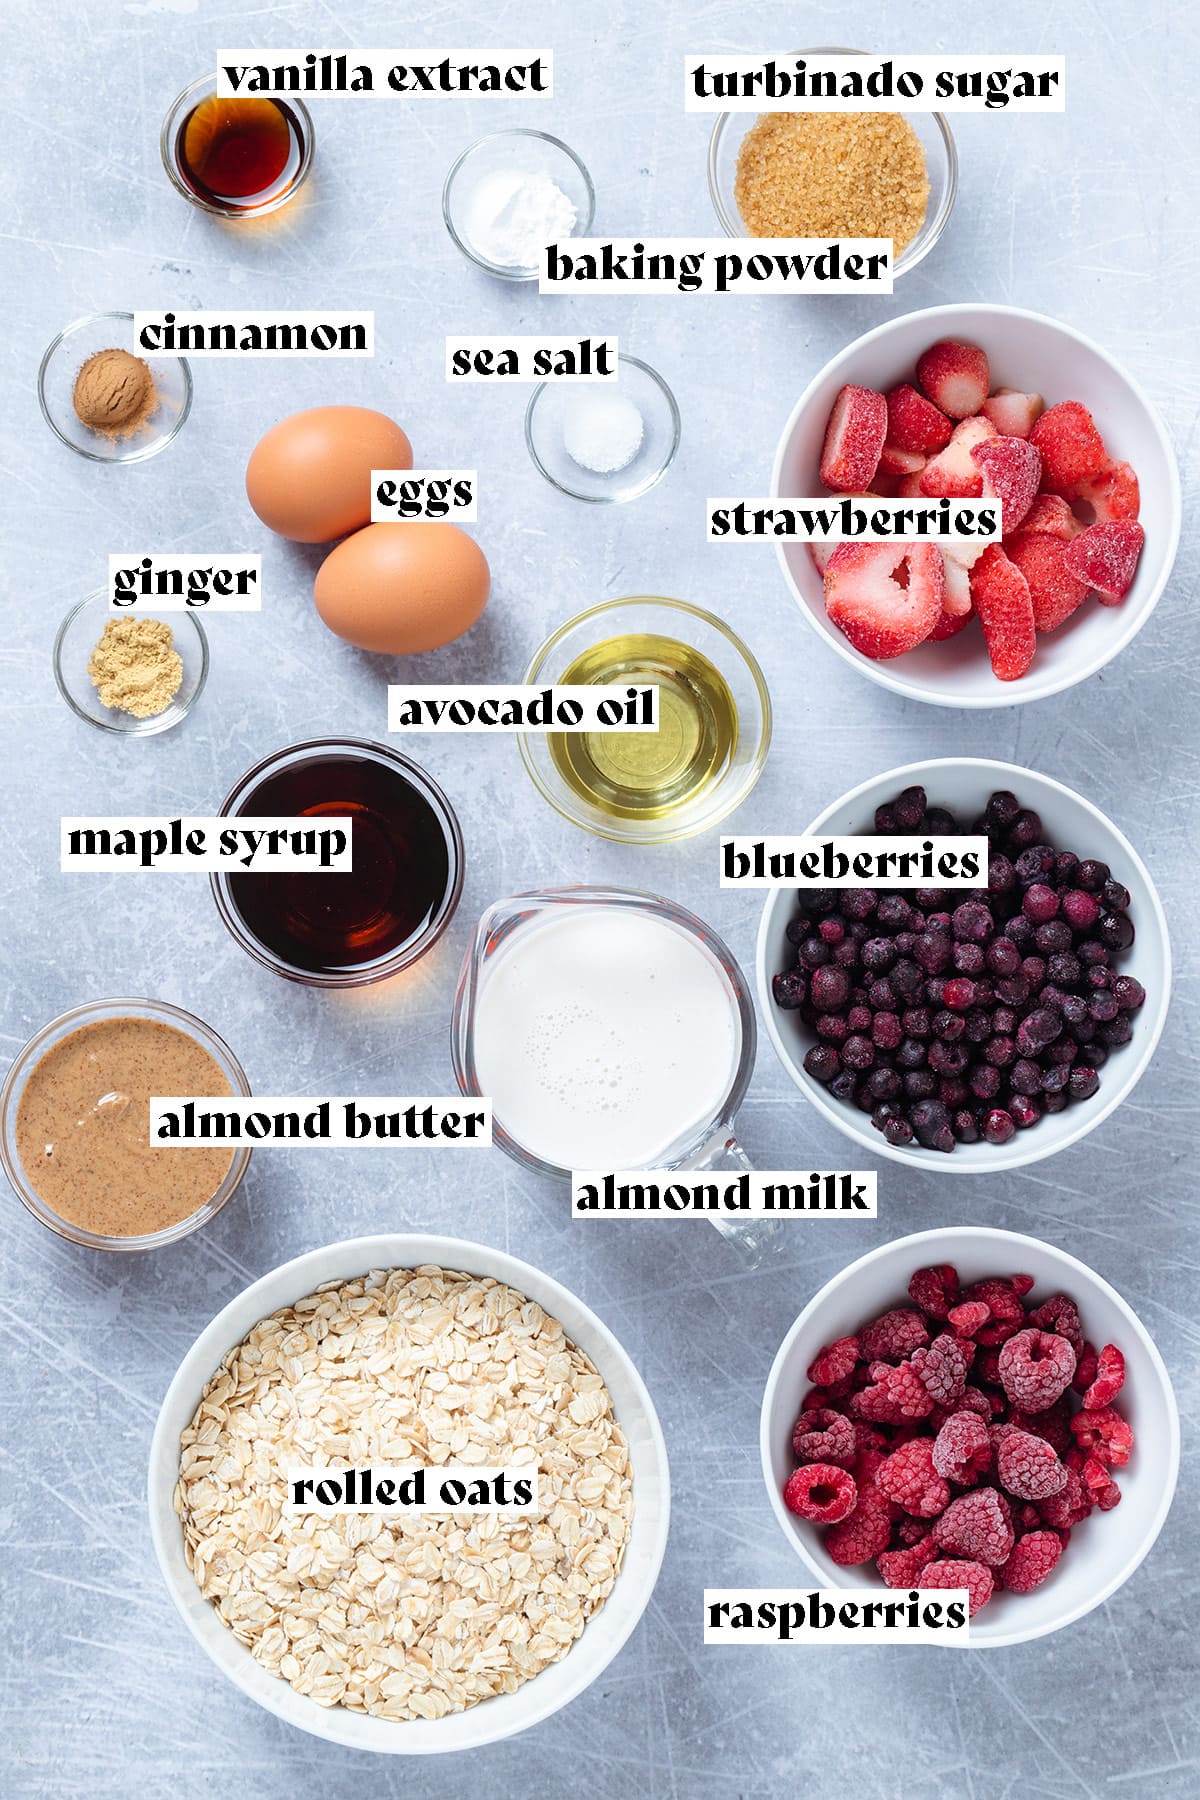 Ingredients for baked oatmeal like oats, berries, milk, oil, and eggs laid out on a grey background.